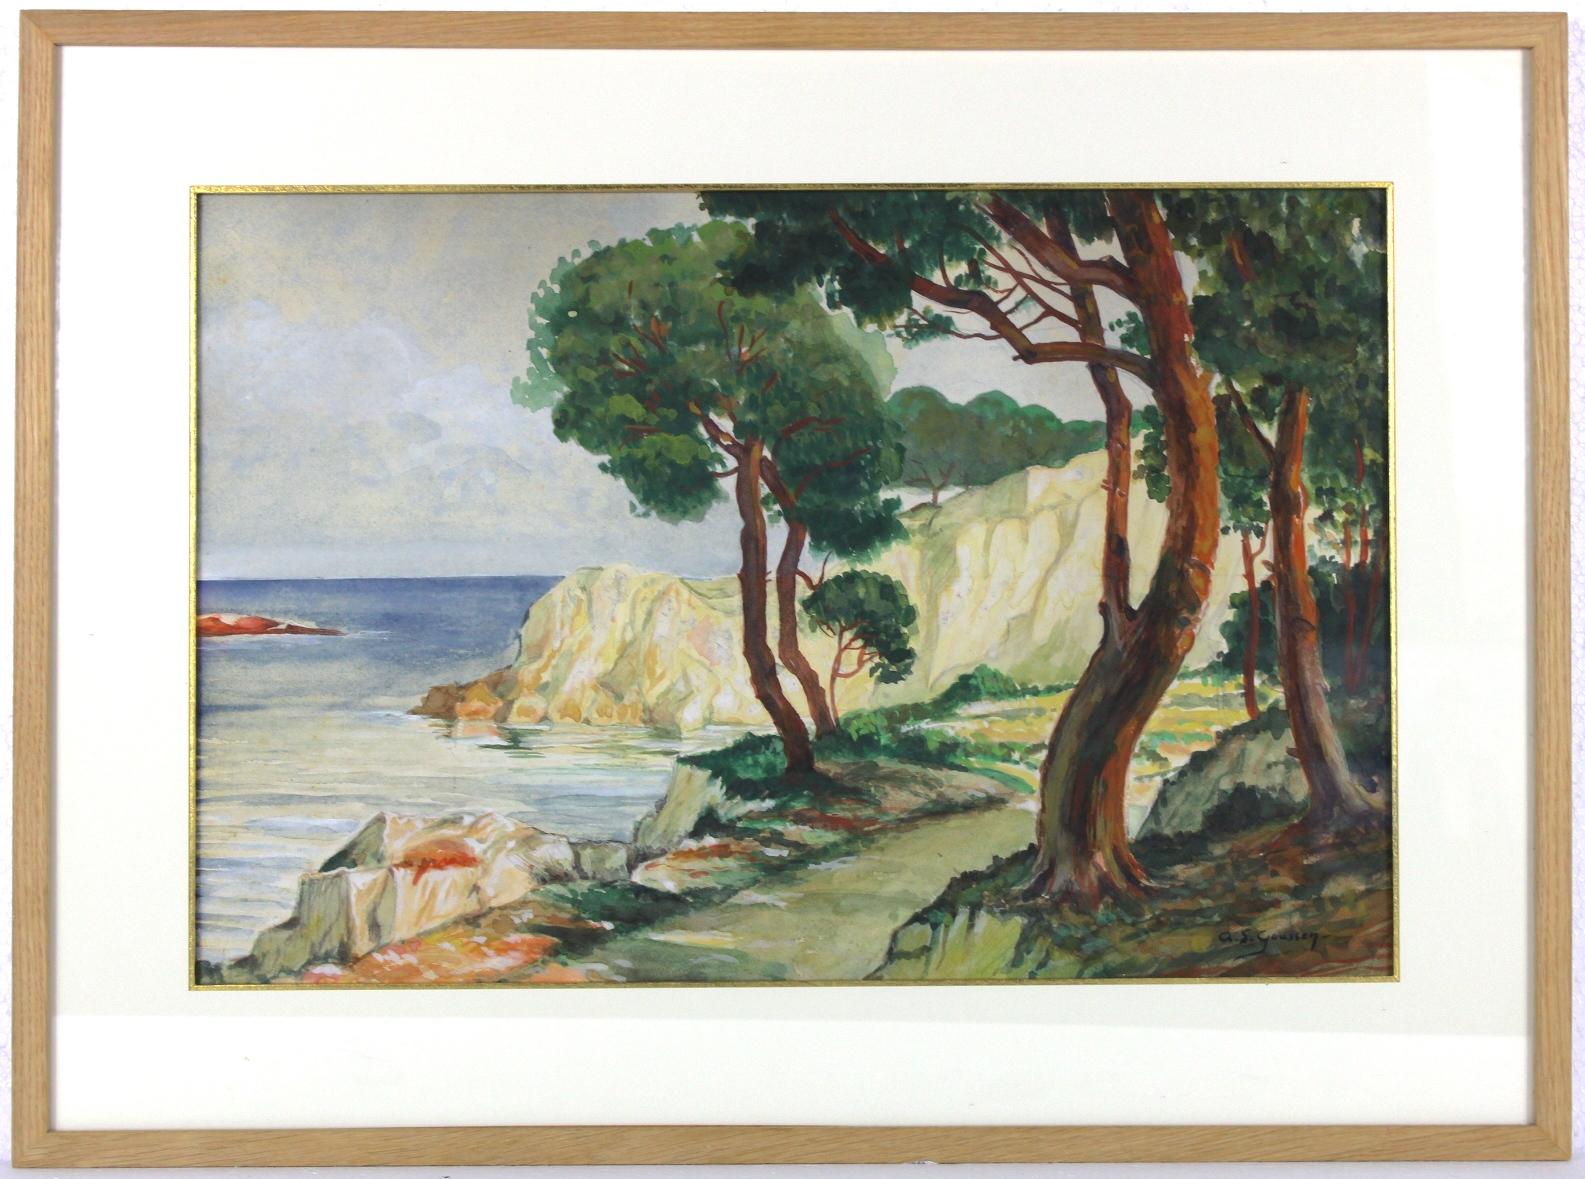 Adolphe Gaussen Figurative Painting - Mediterranean Sea, Original Impressionist Large Watercolor, French Painter